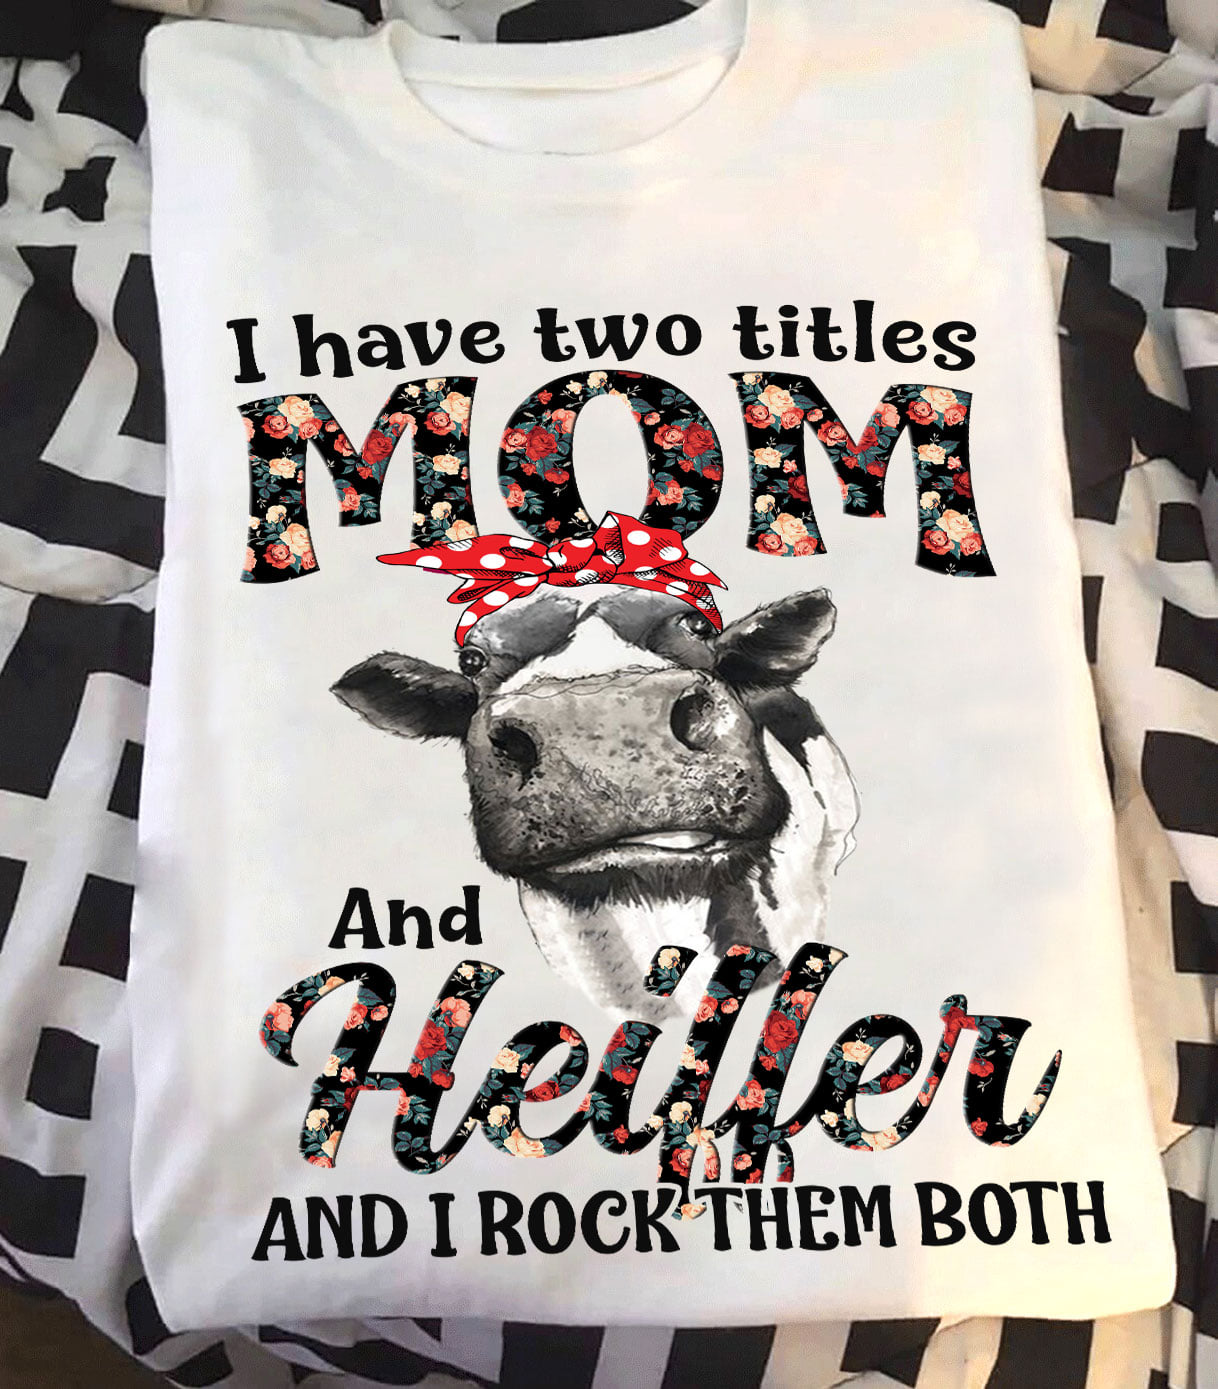 I have two titles Mom and Heilfer and I rock them both